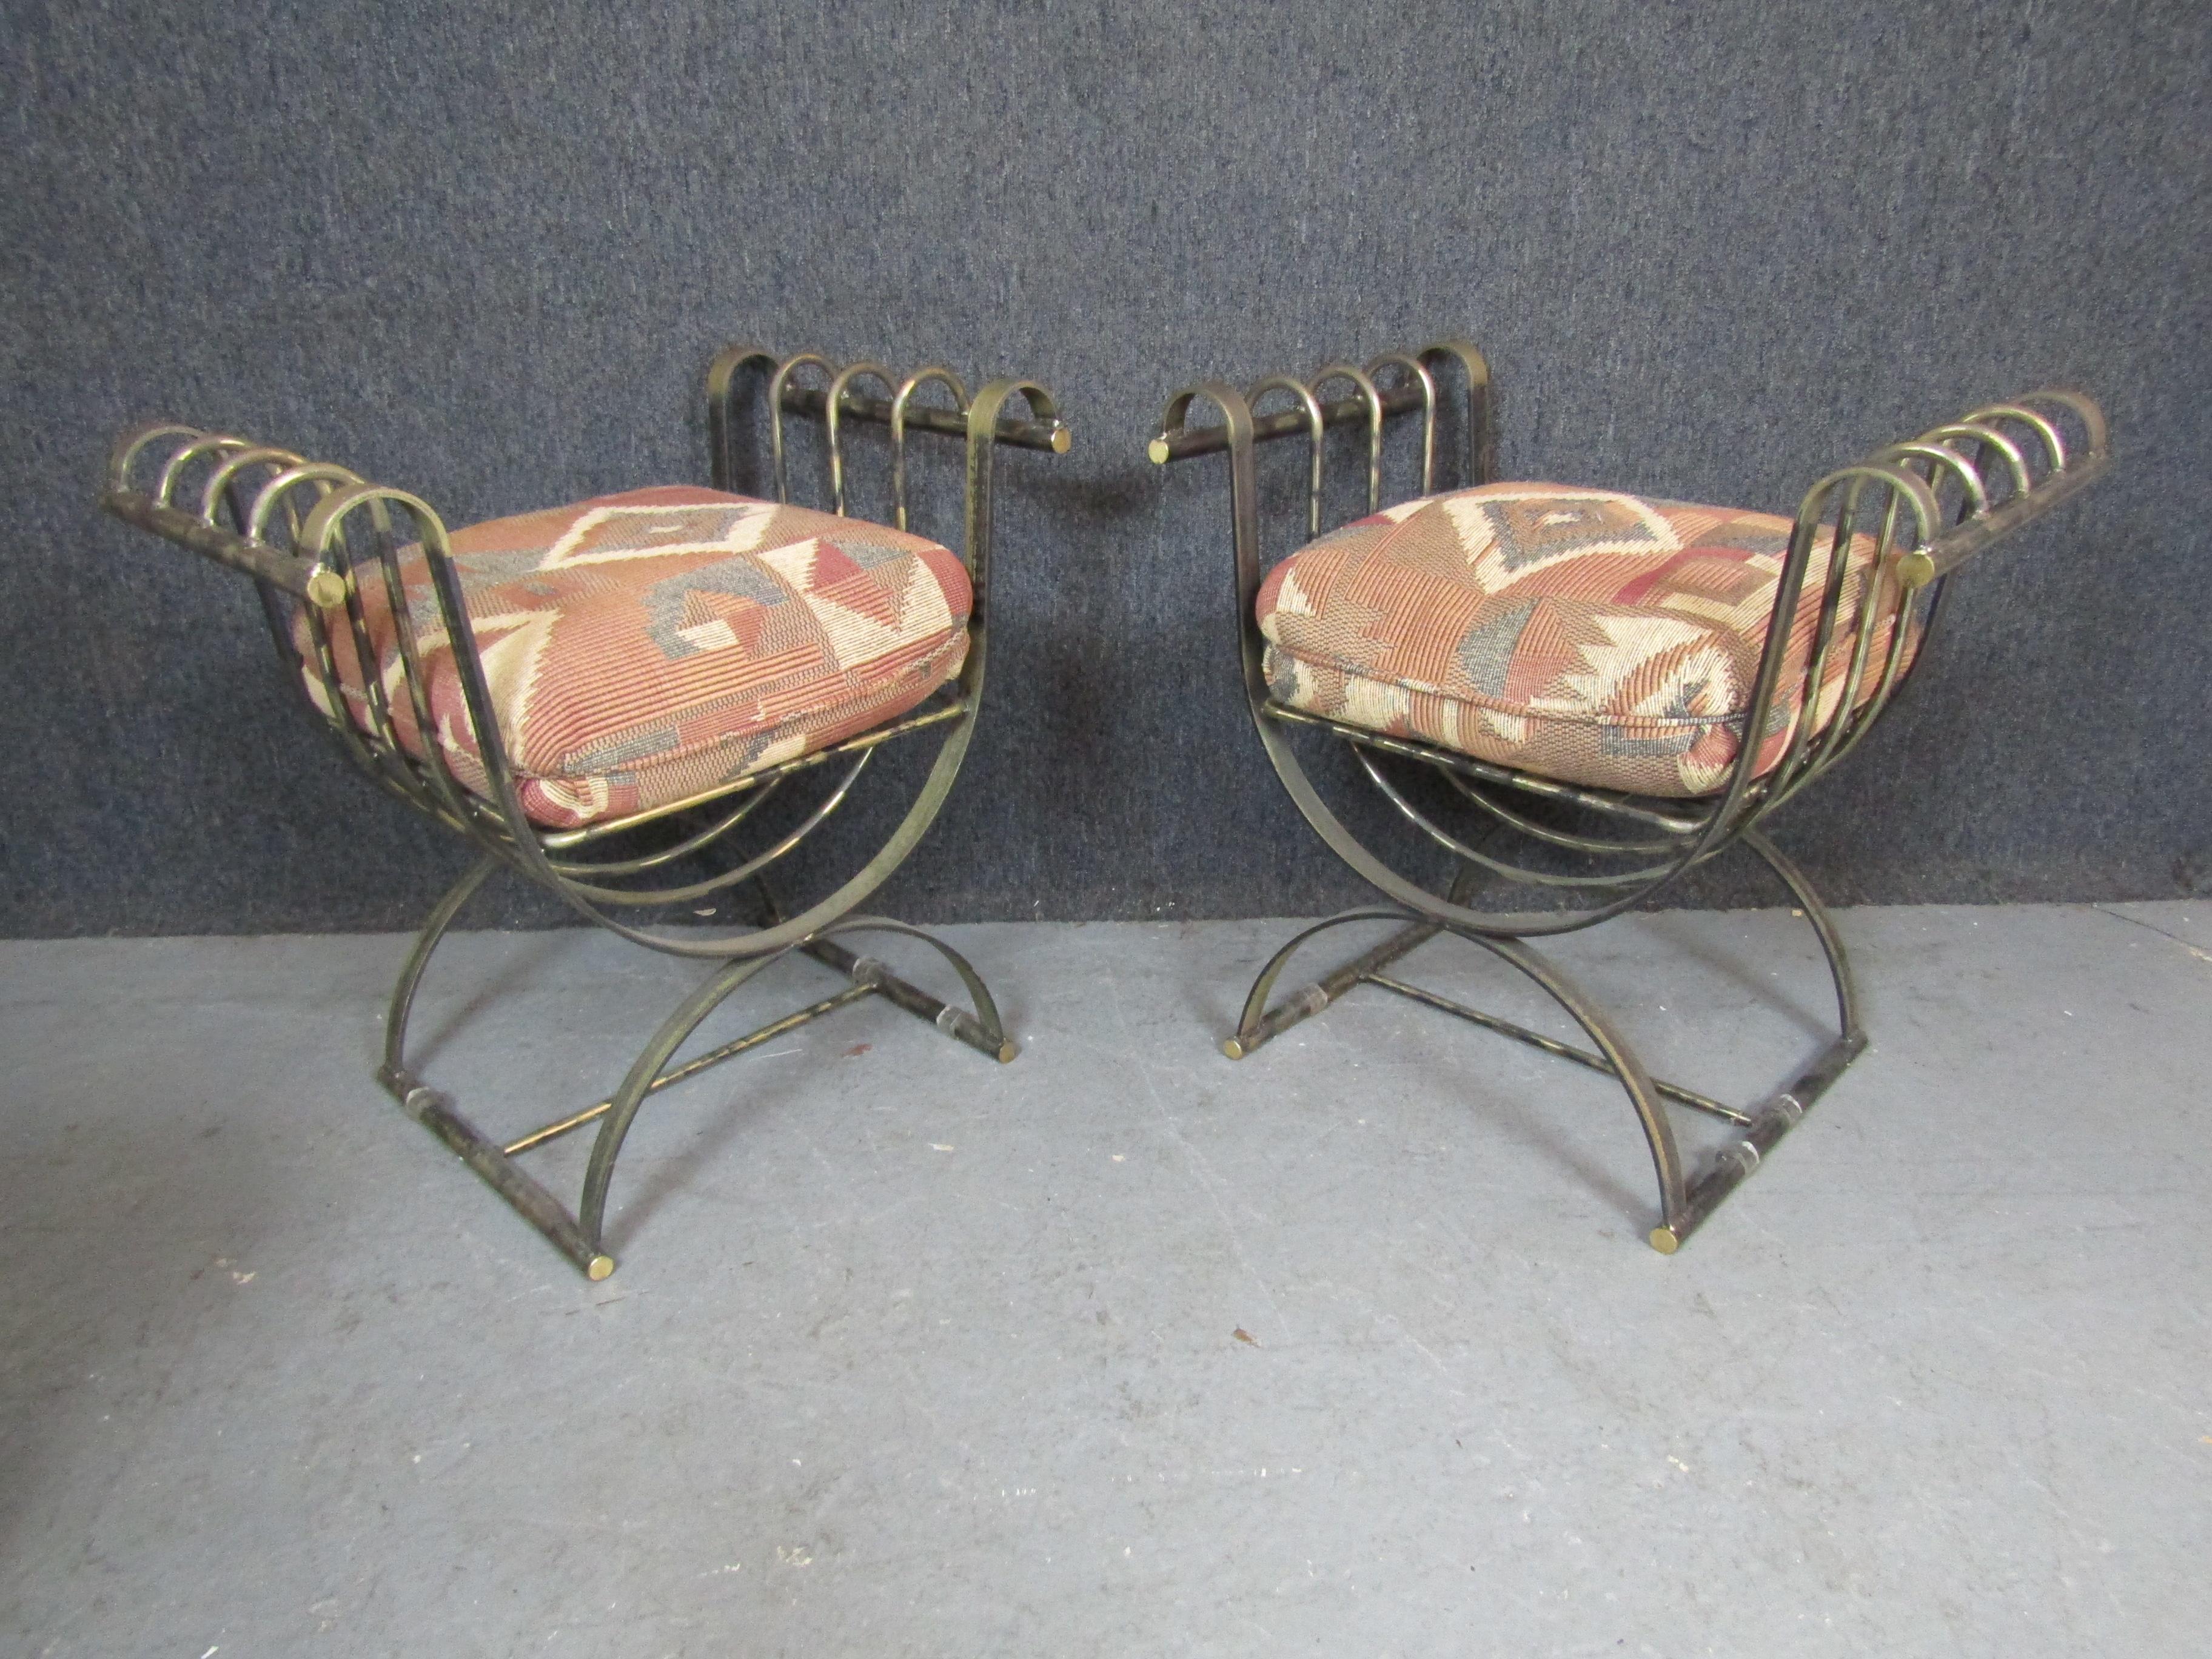 Pair of vintage throne chairs made of heavy burnished iron. Thick cushion set on the strong frame. Great for indoor or garden use.
Please confirm location NY or NJ